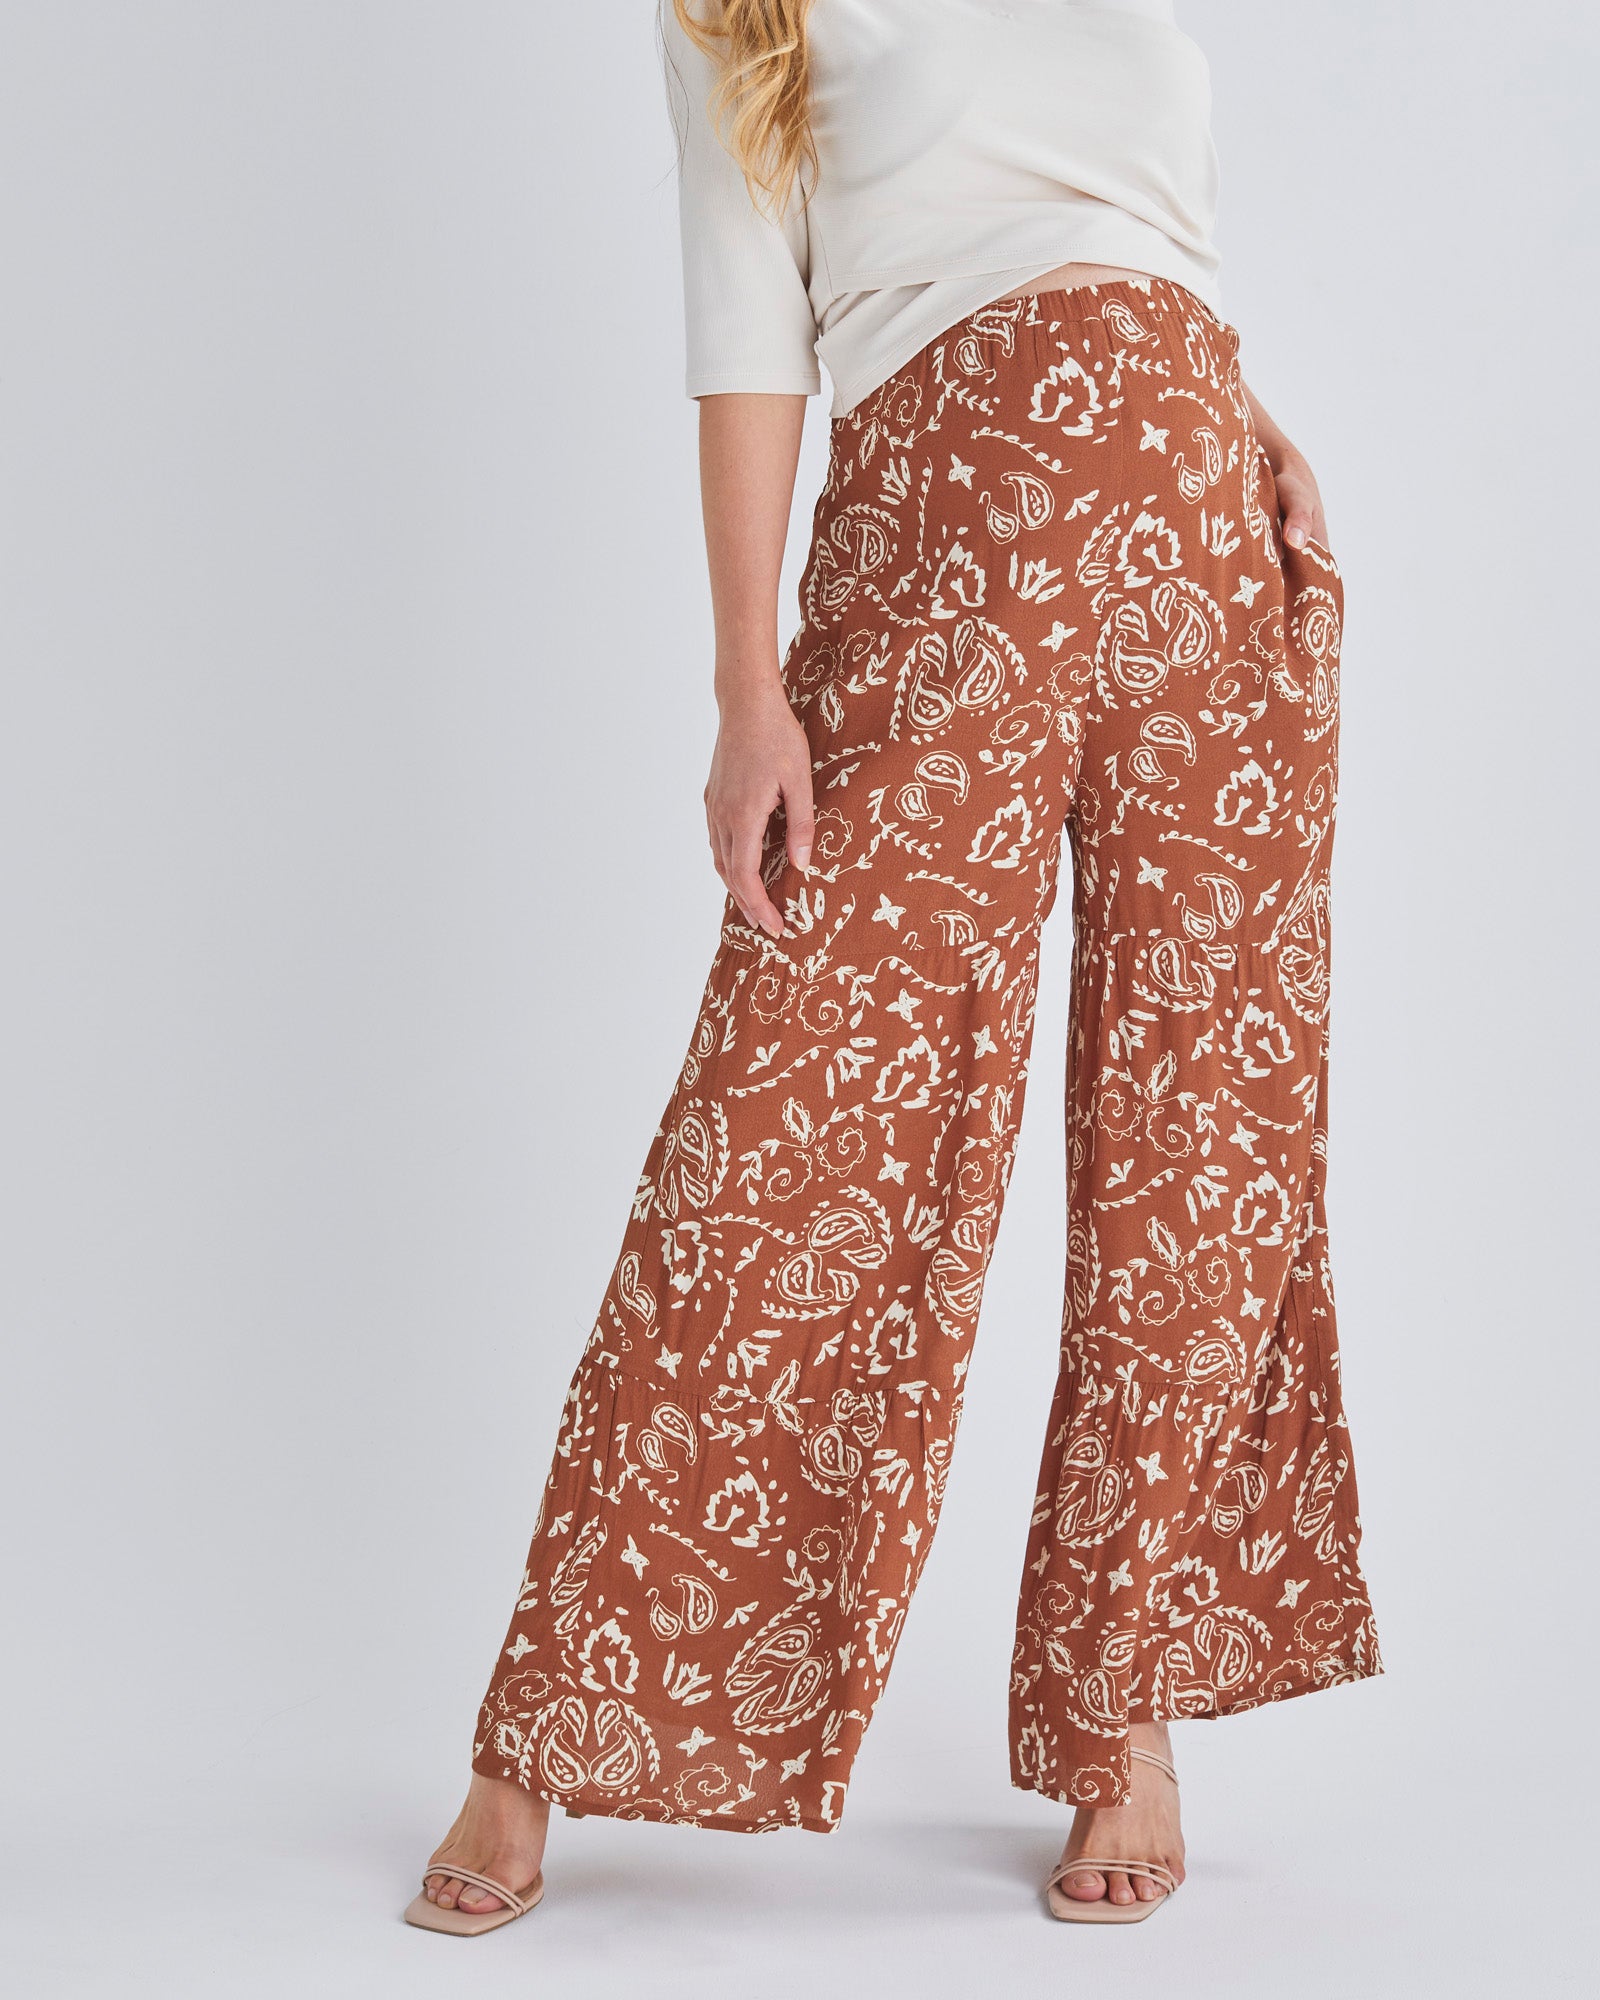 Stacie Wide Leg Maternity Ruffled Pants in Brown Paisley Print from Angel Maternity